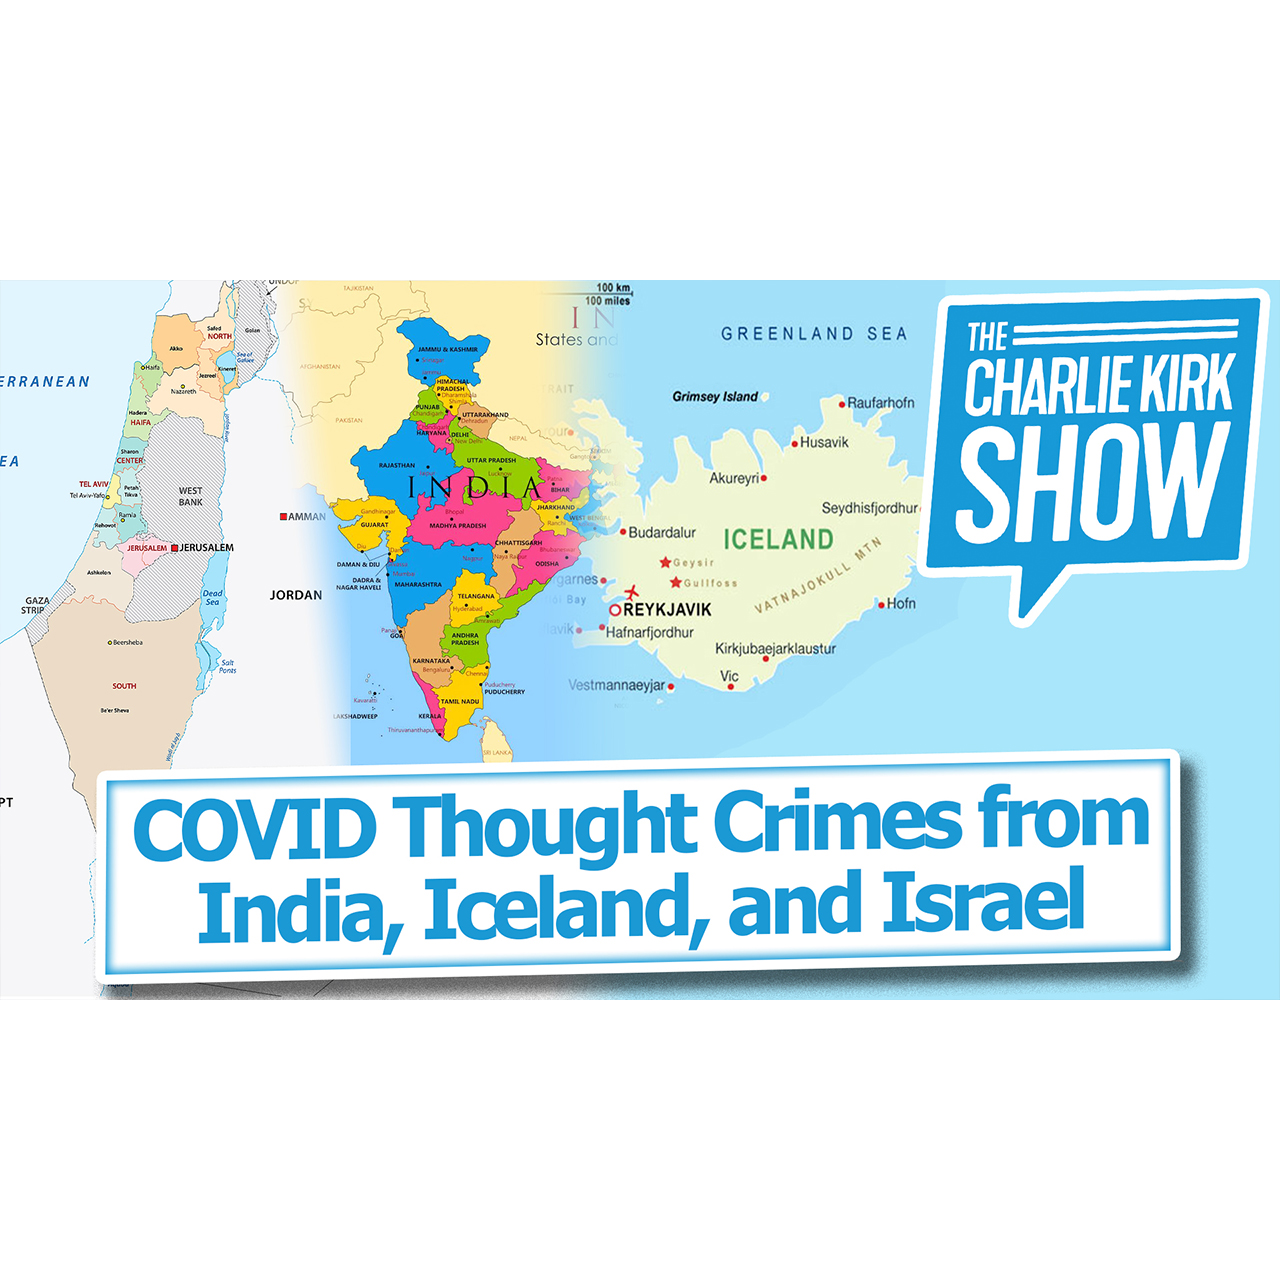 COVID Thought Crimes from India, Iceland, and Israel